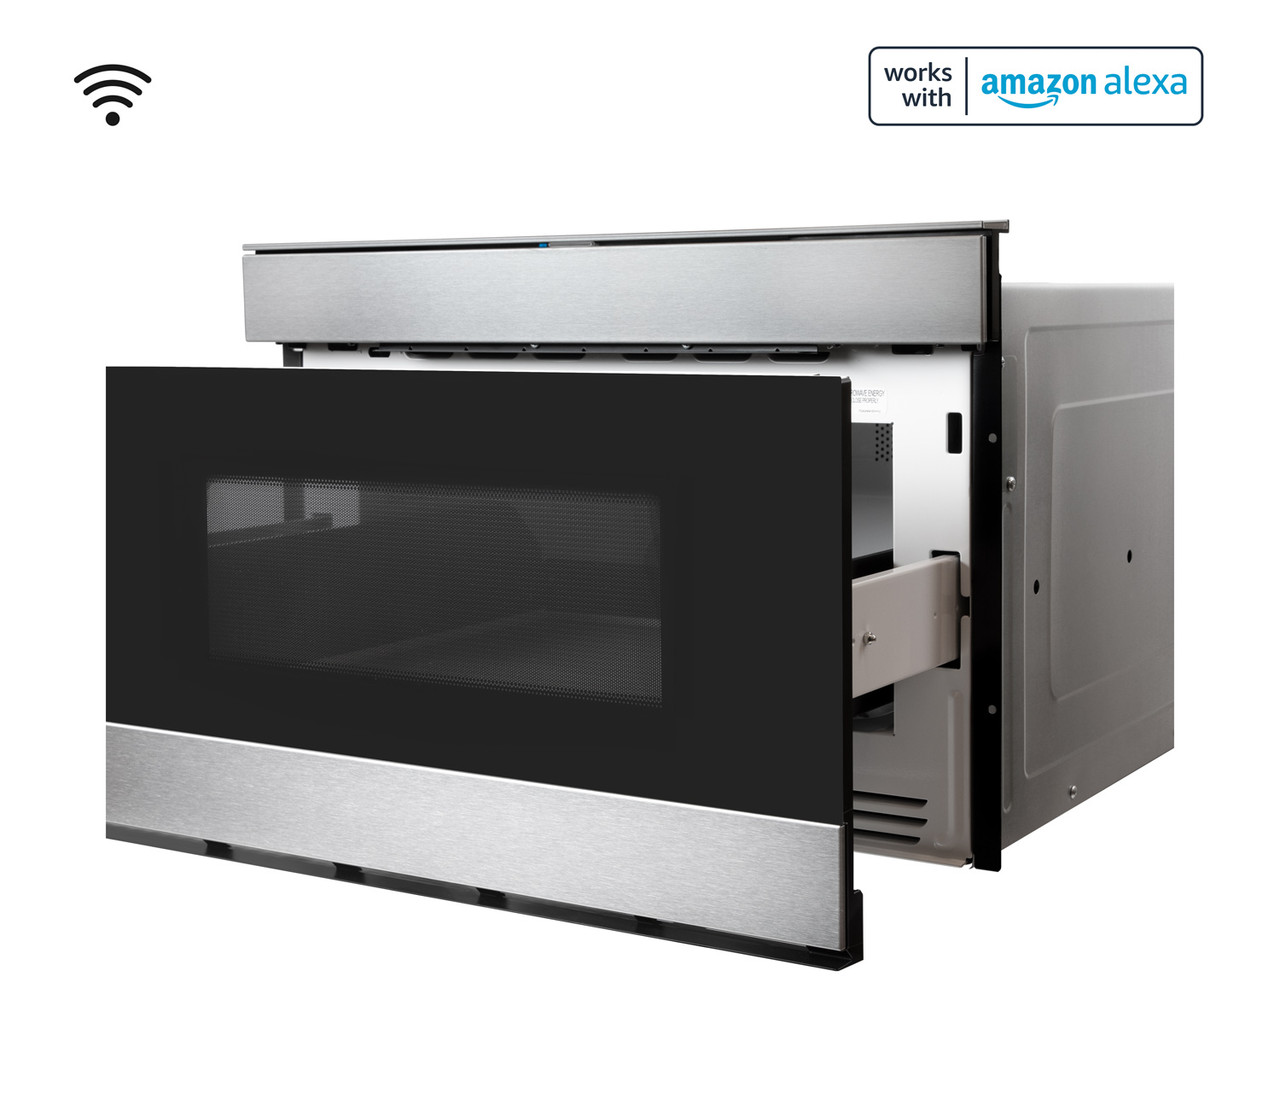 24 in. Sharp Stainless Steel Smart Microwave Drawer Oven (SMD2489ES) Works with Alexa, and the Sharp Kitchen App -  left angle open view